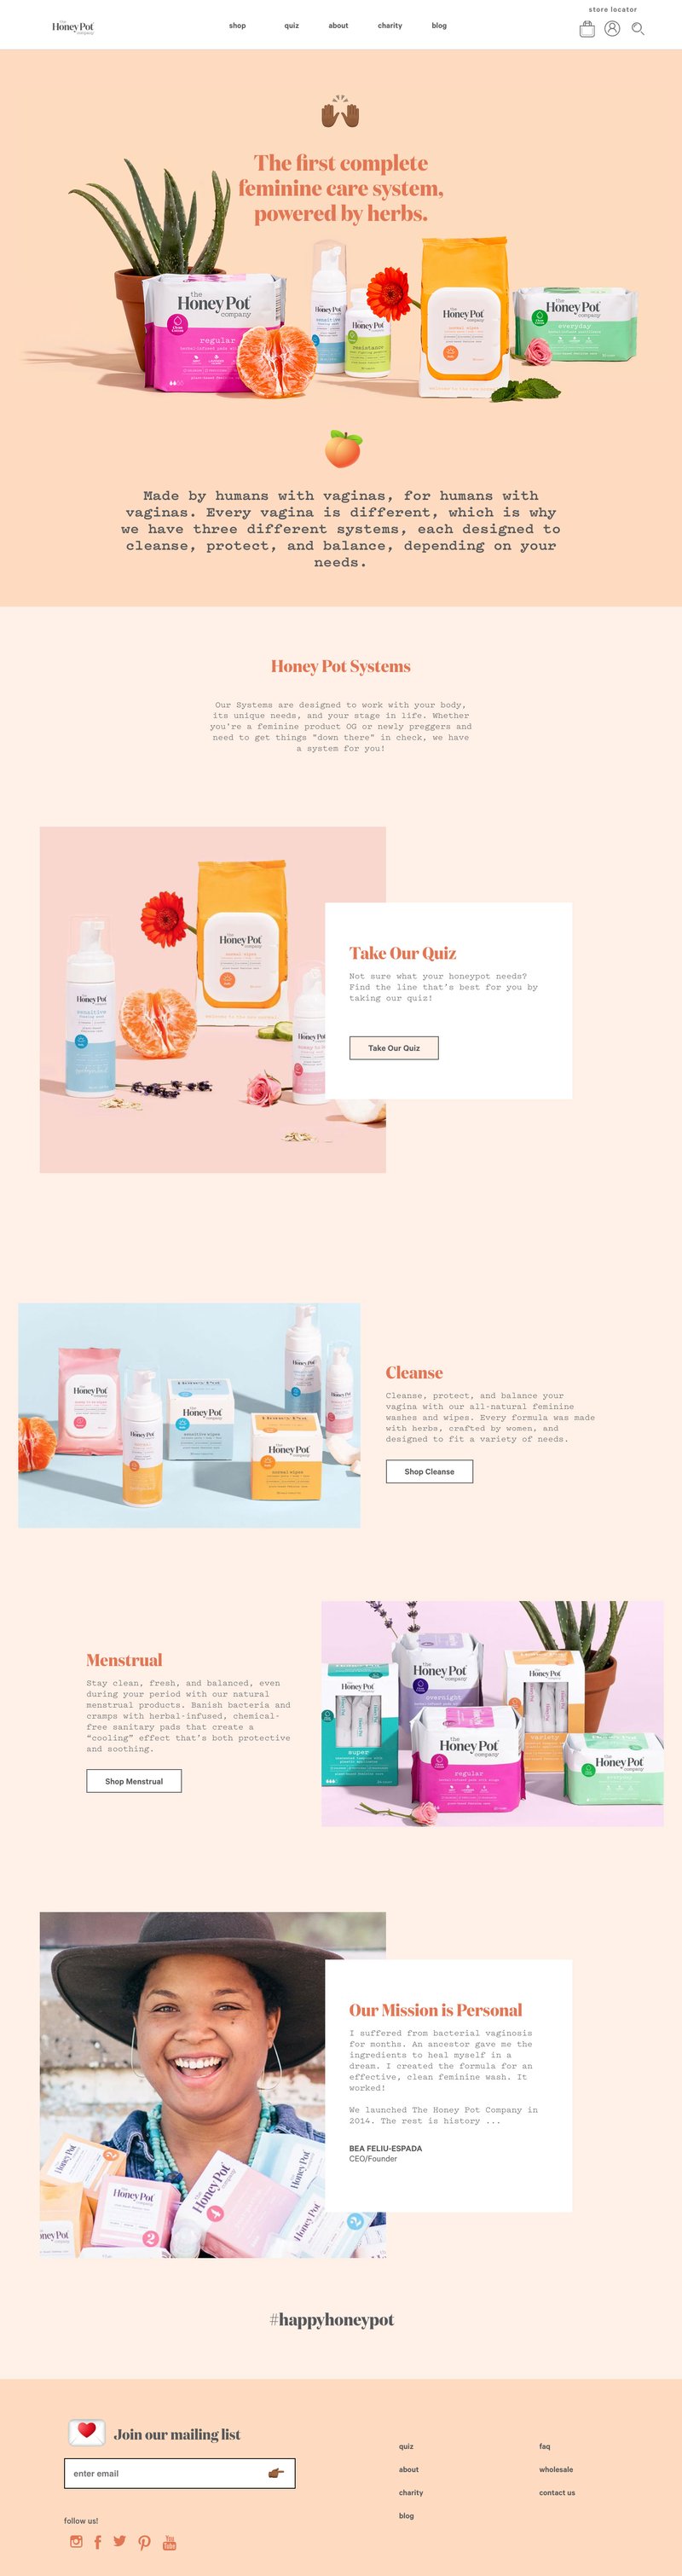 The Honey Pot - homepage webpage layout